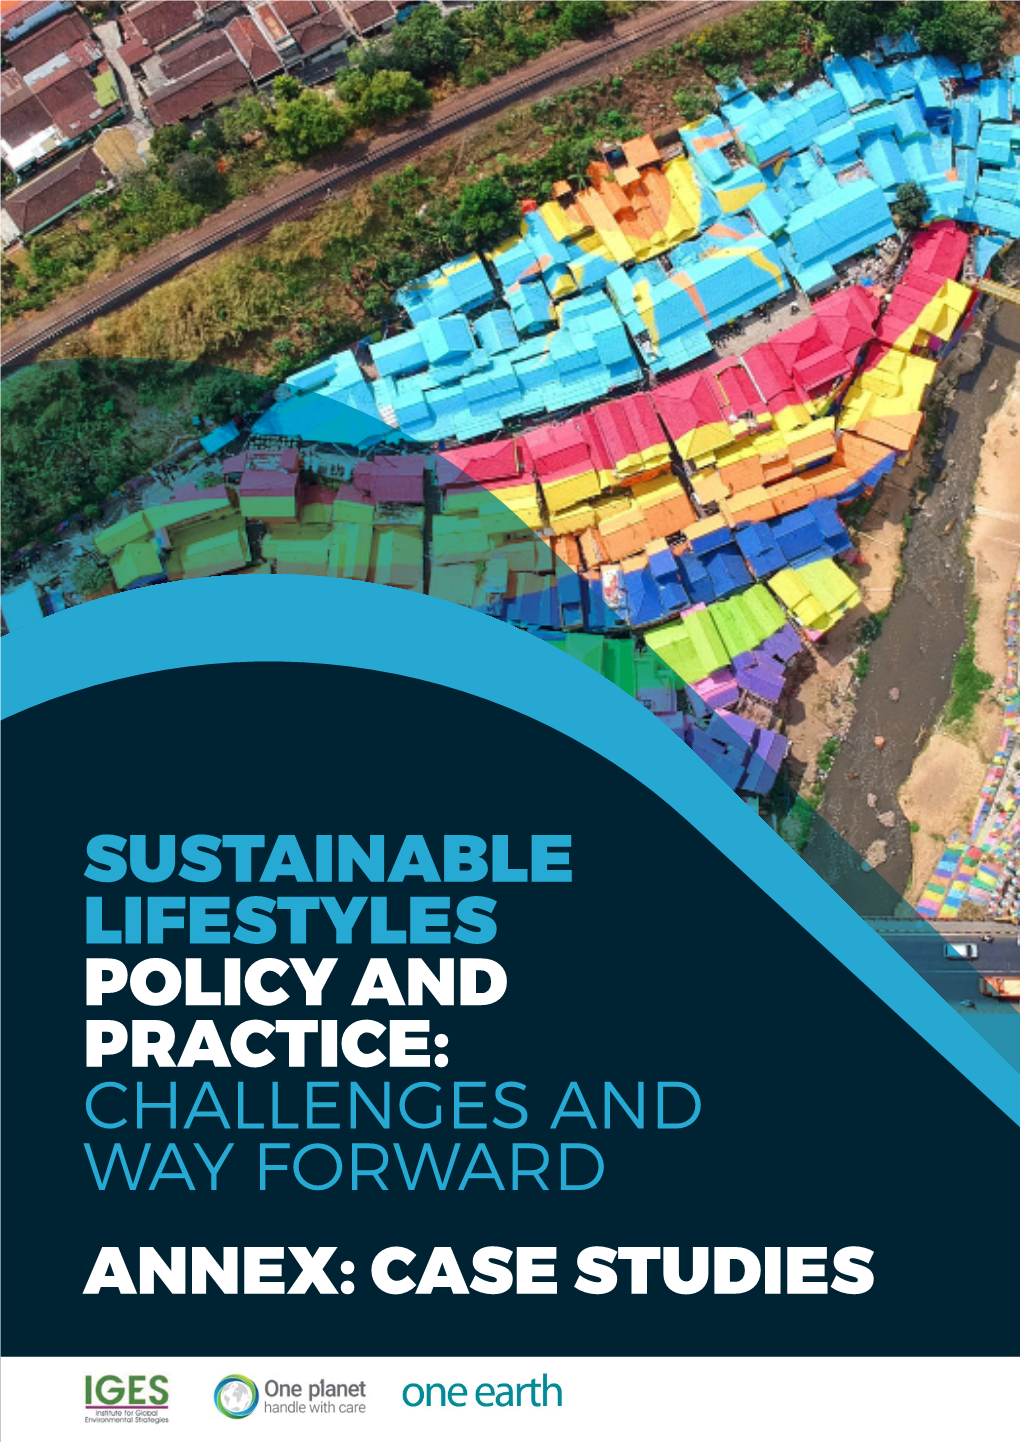 Sustainable Lifestyles Policy and Practice: Challenges and Way Forward Annex: Case Studies Sustainable Lifestyles Policy and Practice: Challenges and Way Forward